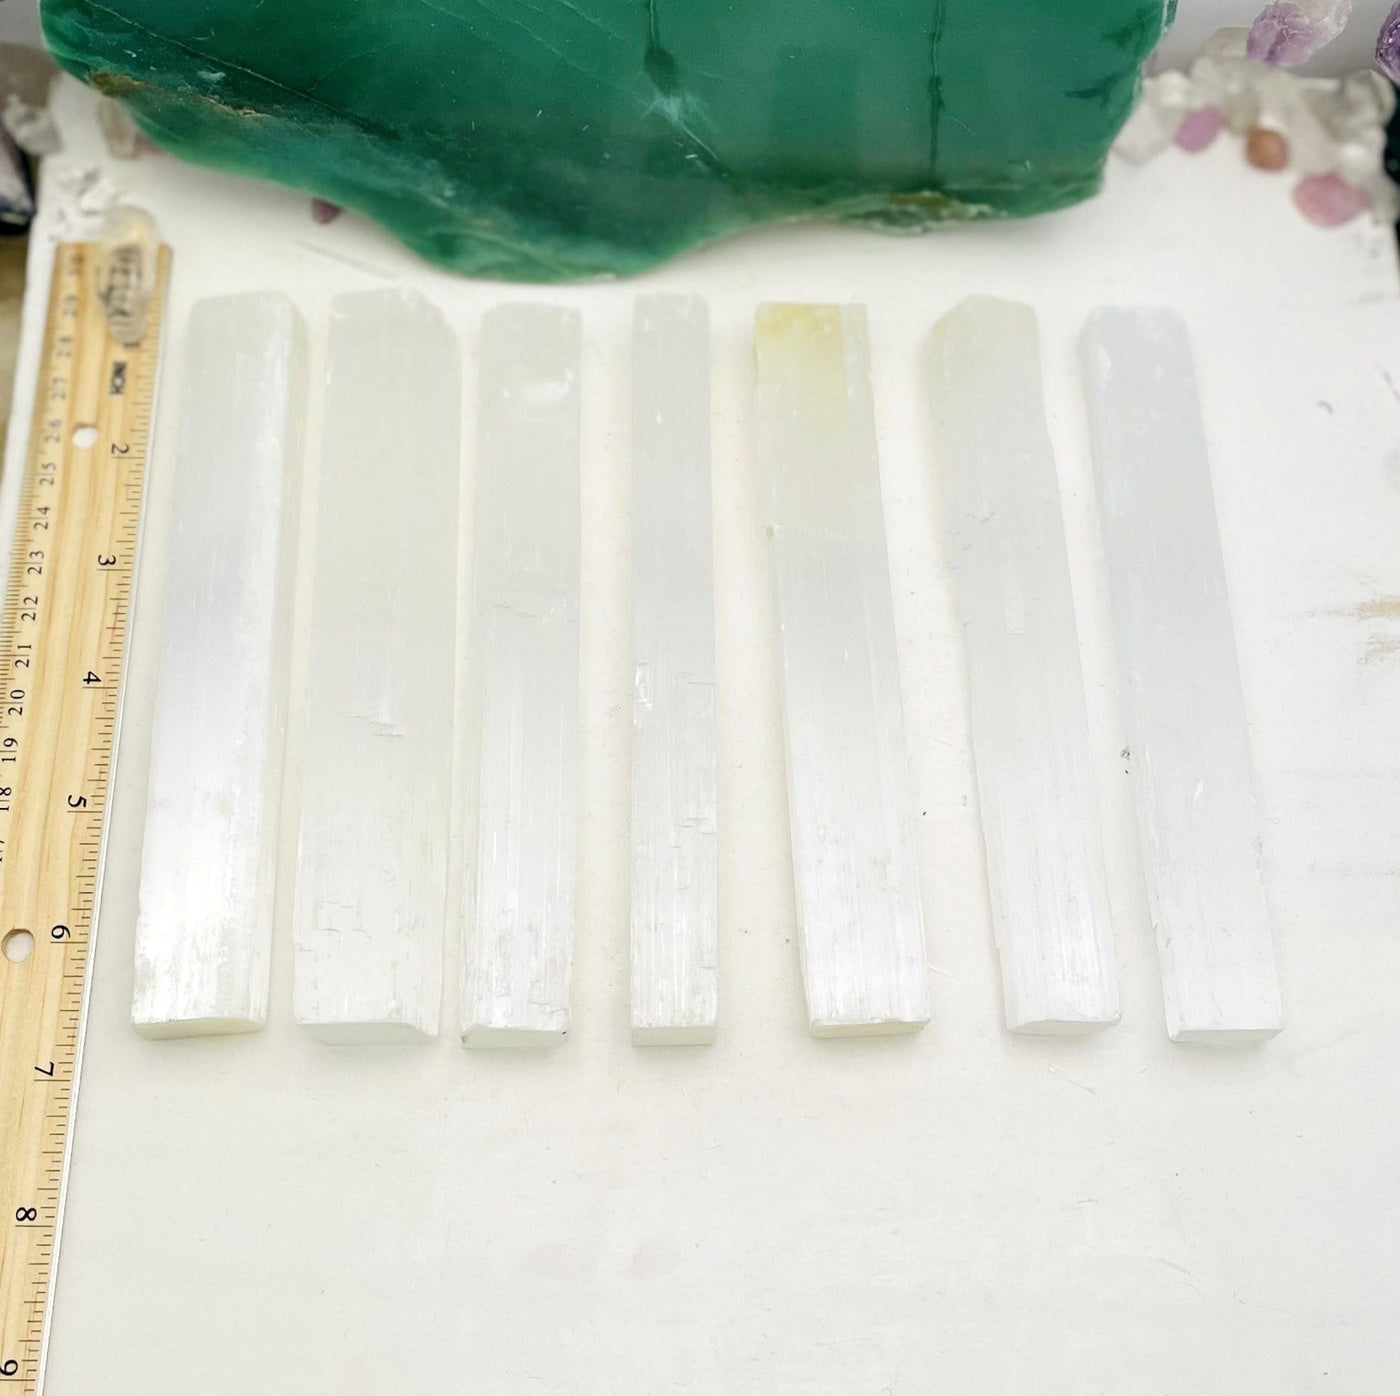 selenite bars with ruler for size reference